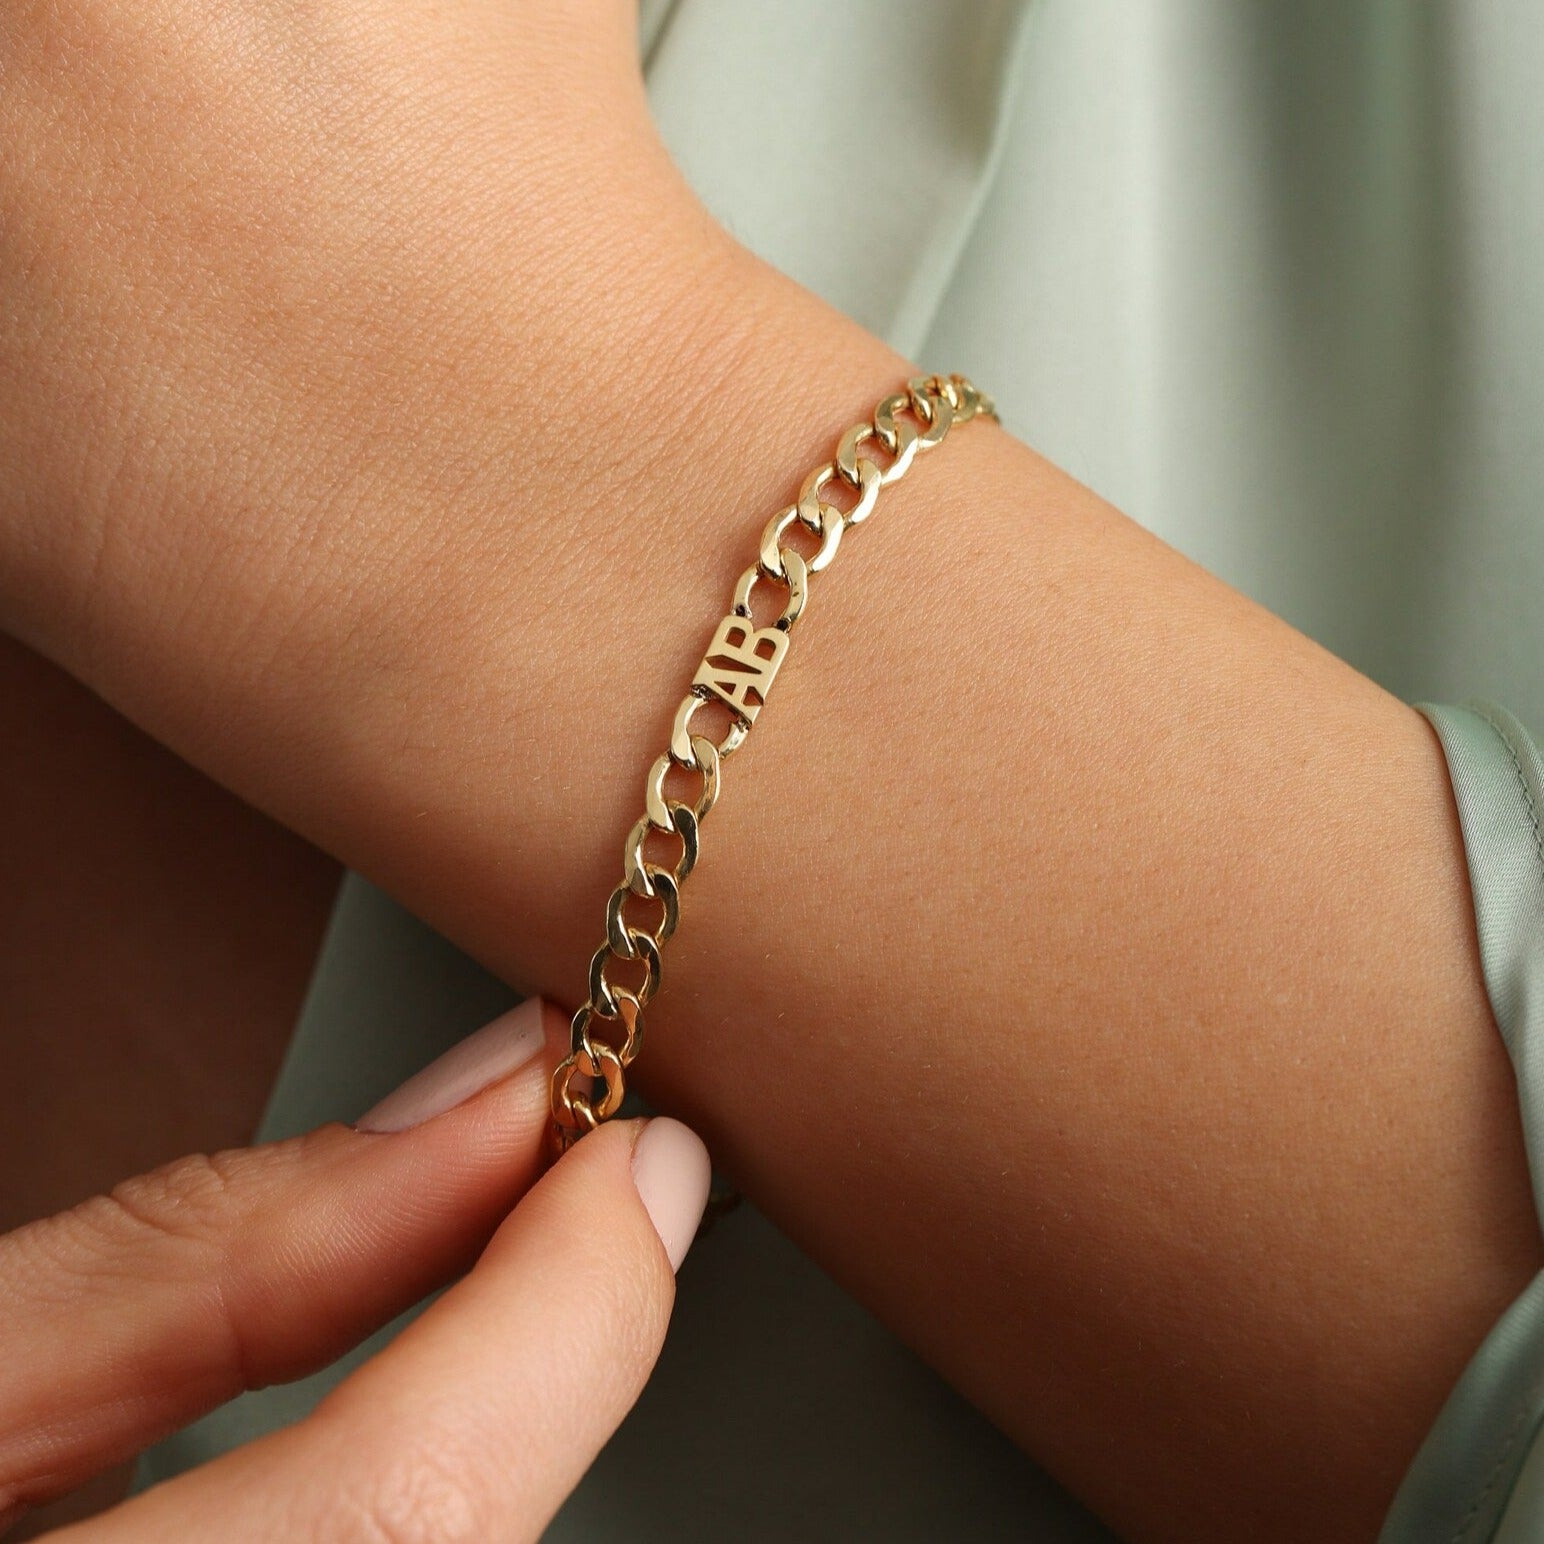 Whether it's Valentine's Day, your anniversary, her birthday, or Mother's Day, our custom gold name bracelets are the perfect way to express your love and appreciation. Make every moment unforgettable with a gift that reflects the depth of your emotions.